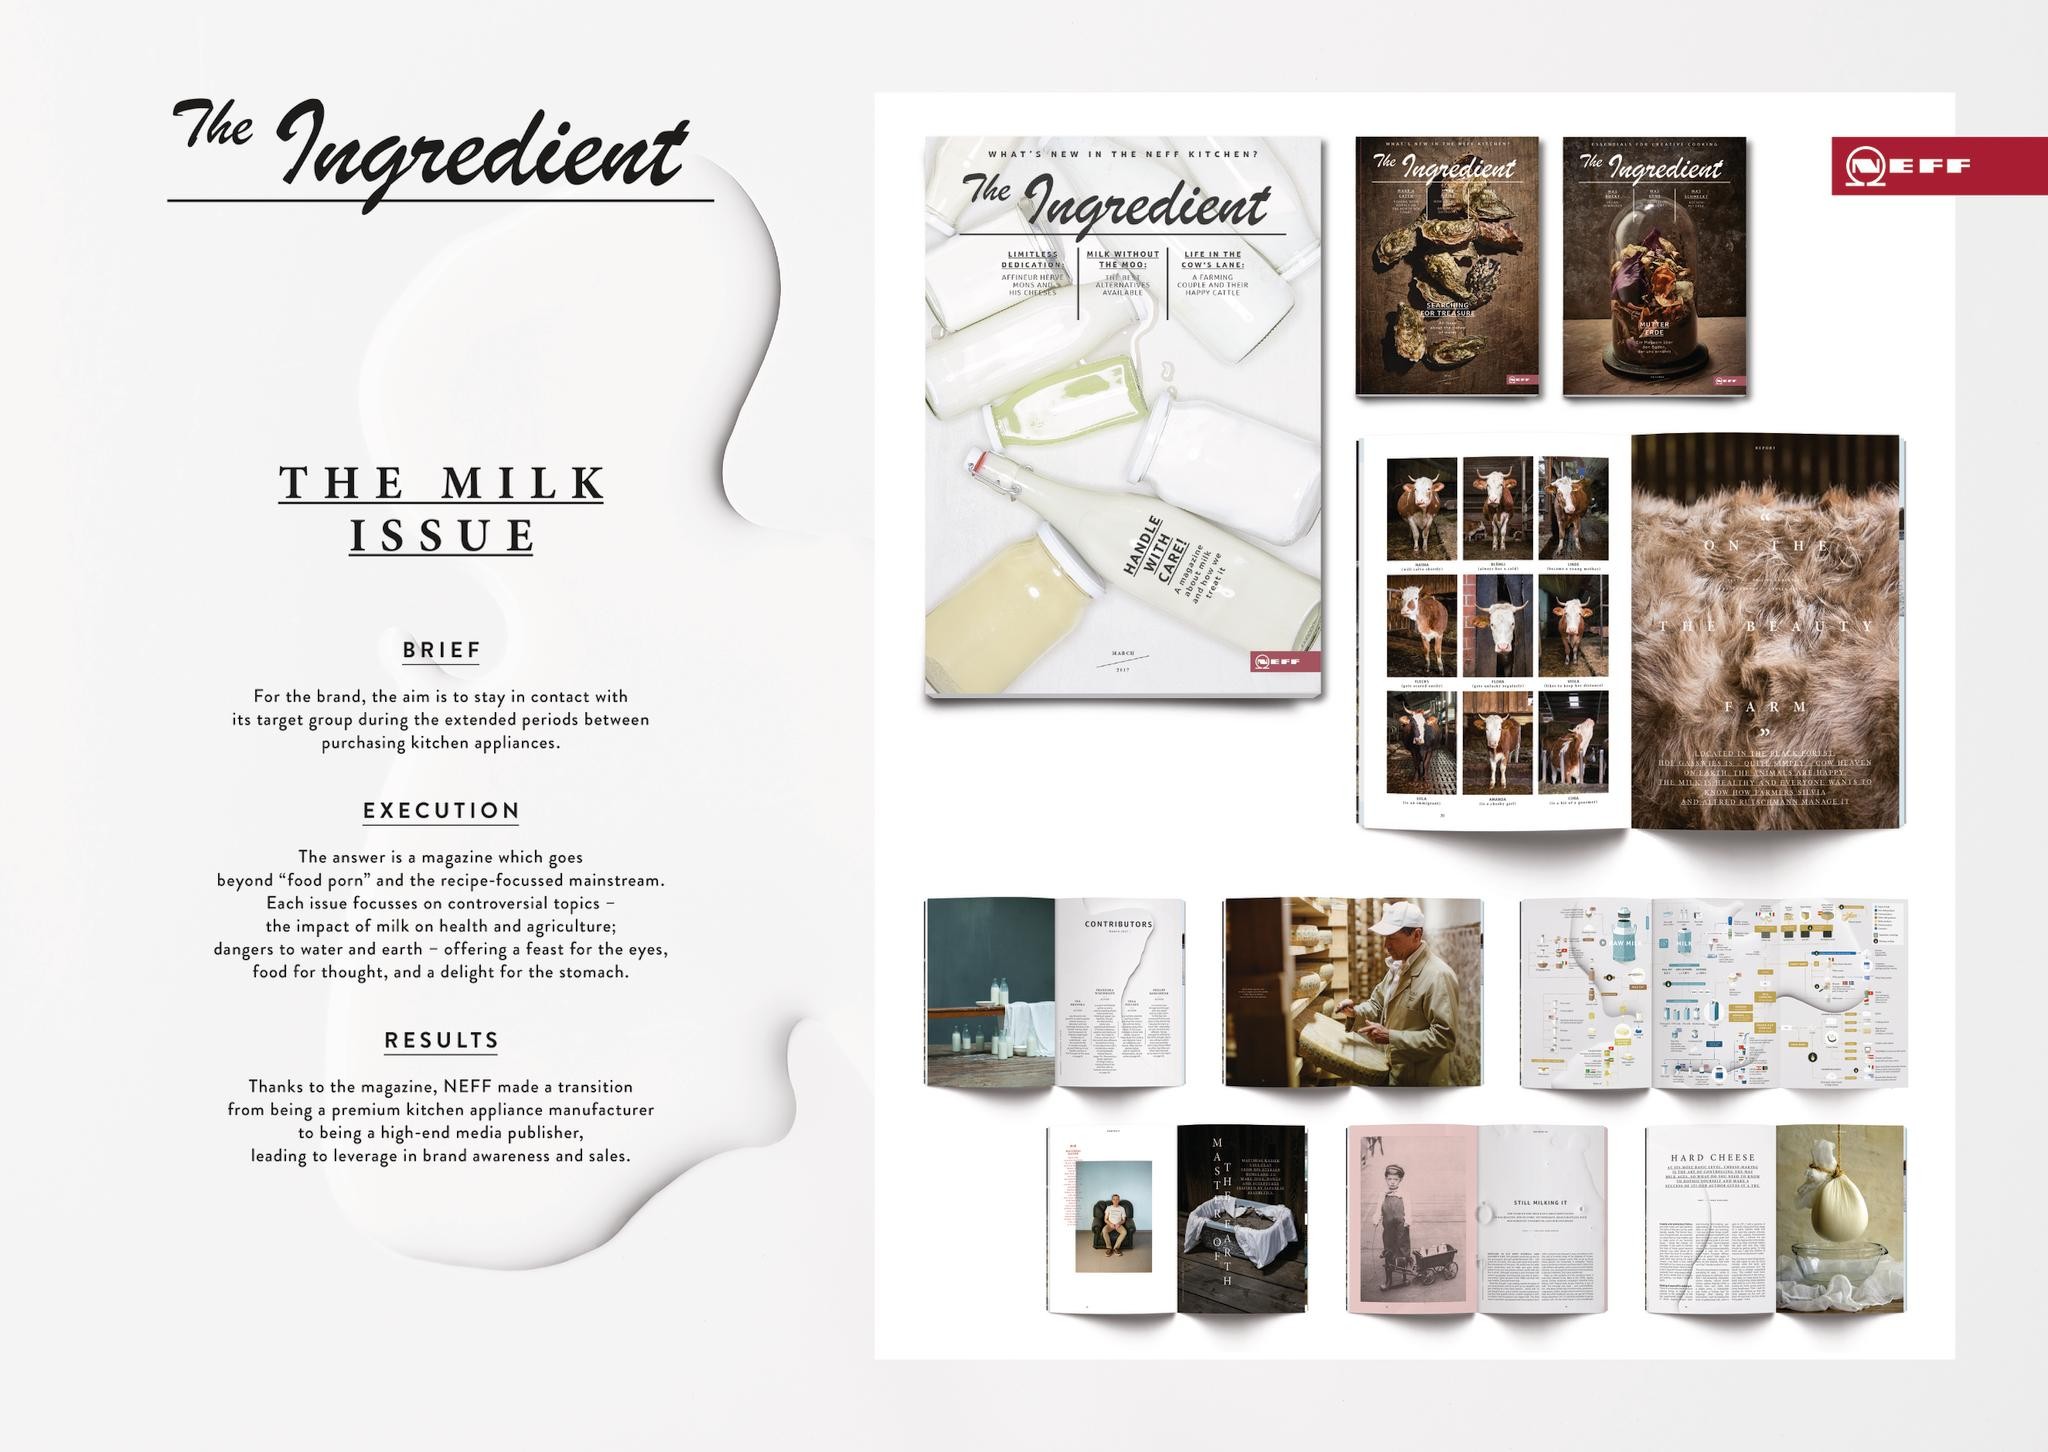 NEFF The Ingredient – a magazine about milk and how we treat it